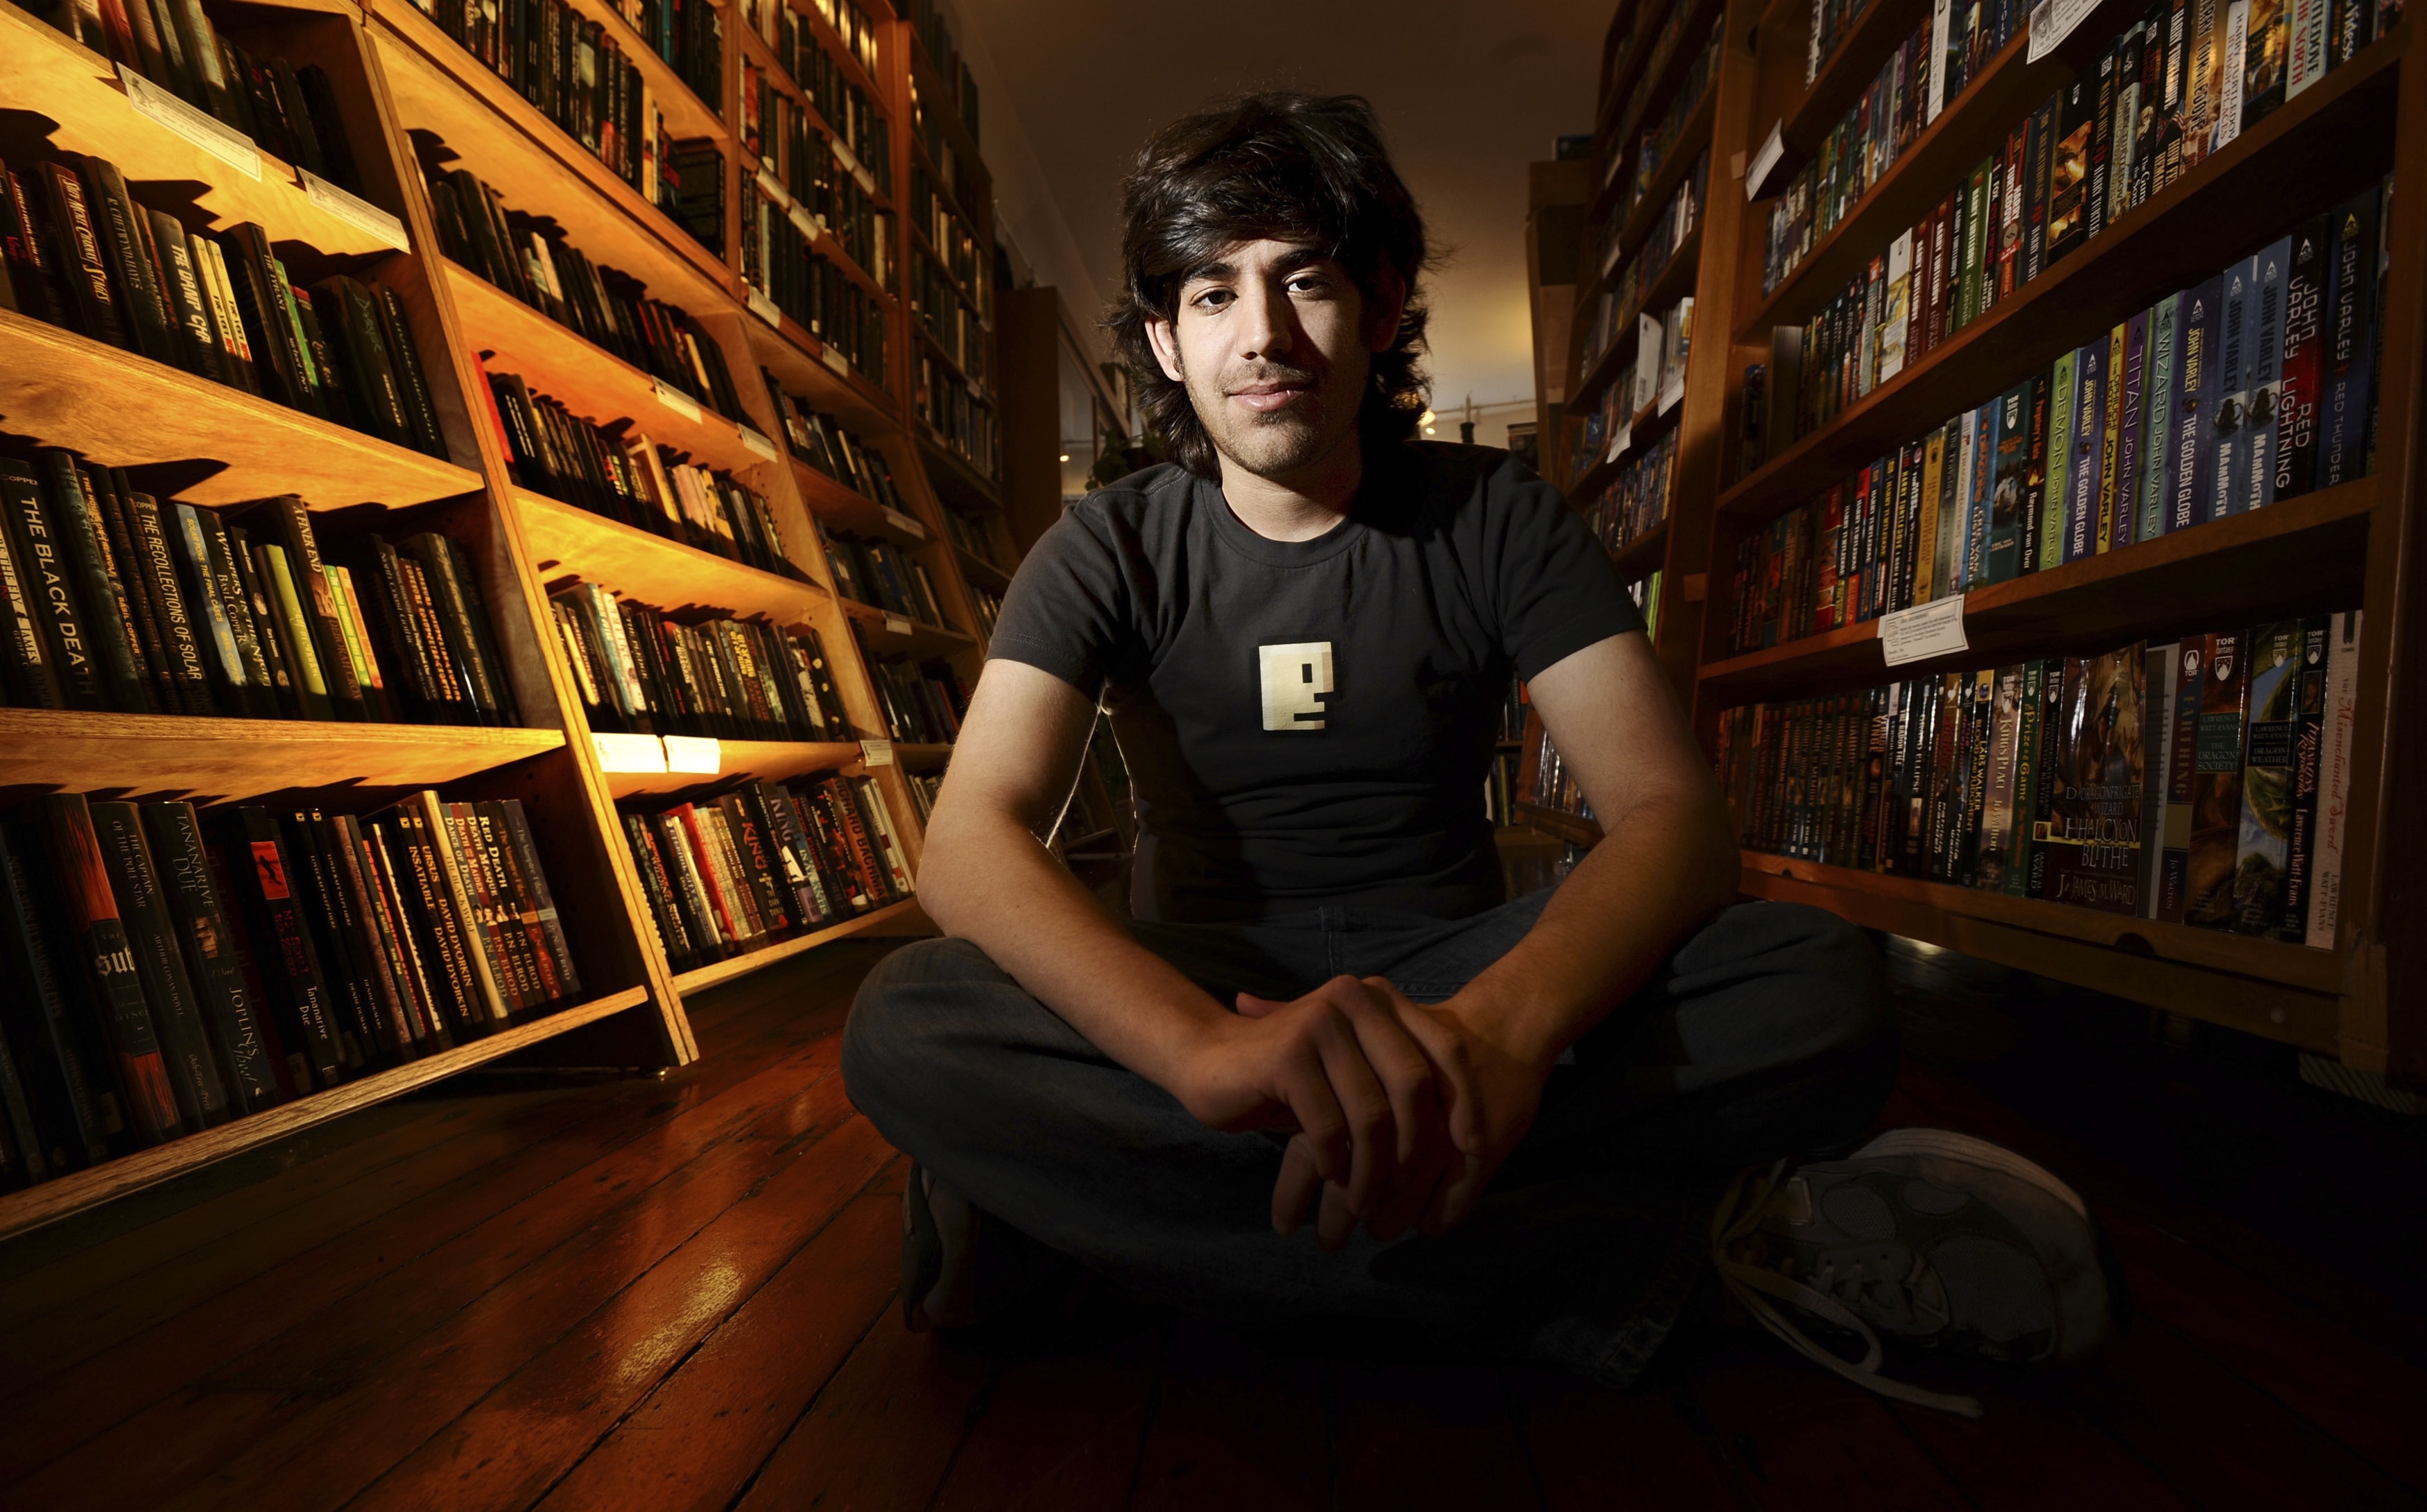 Aaron Swartz was an Internet activist who played a key role in stopping a controversial online piracy bill, REUTERS/Noah Berger